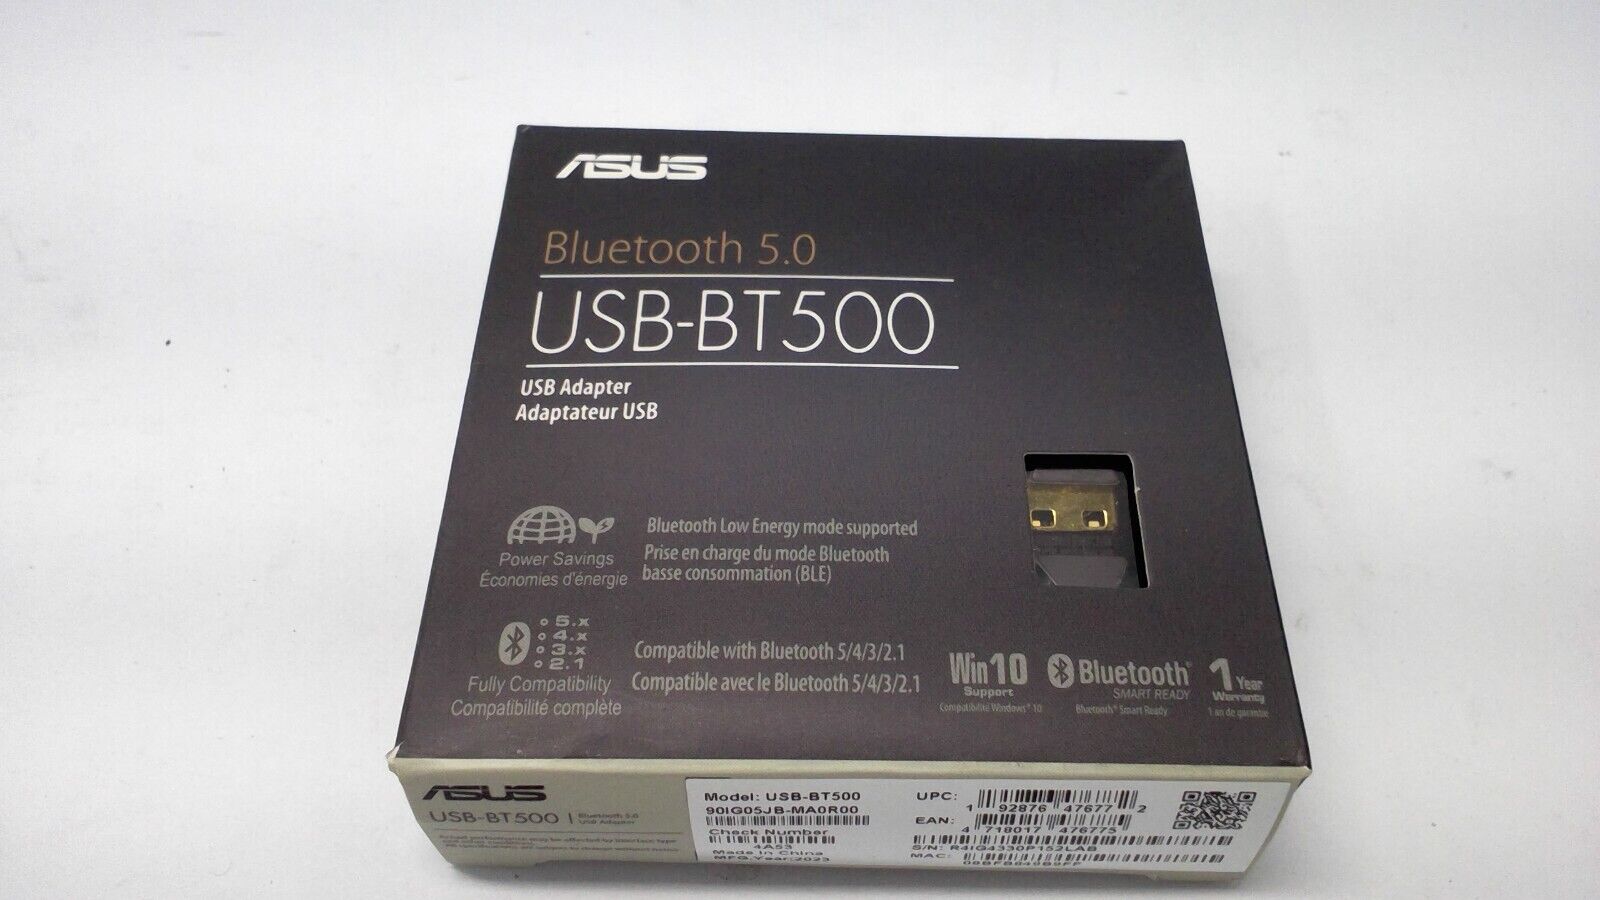 Asus USB-BT500 Bluetooth 5.0 USB Adapter with Ultra Small Design Read*Detail*